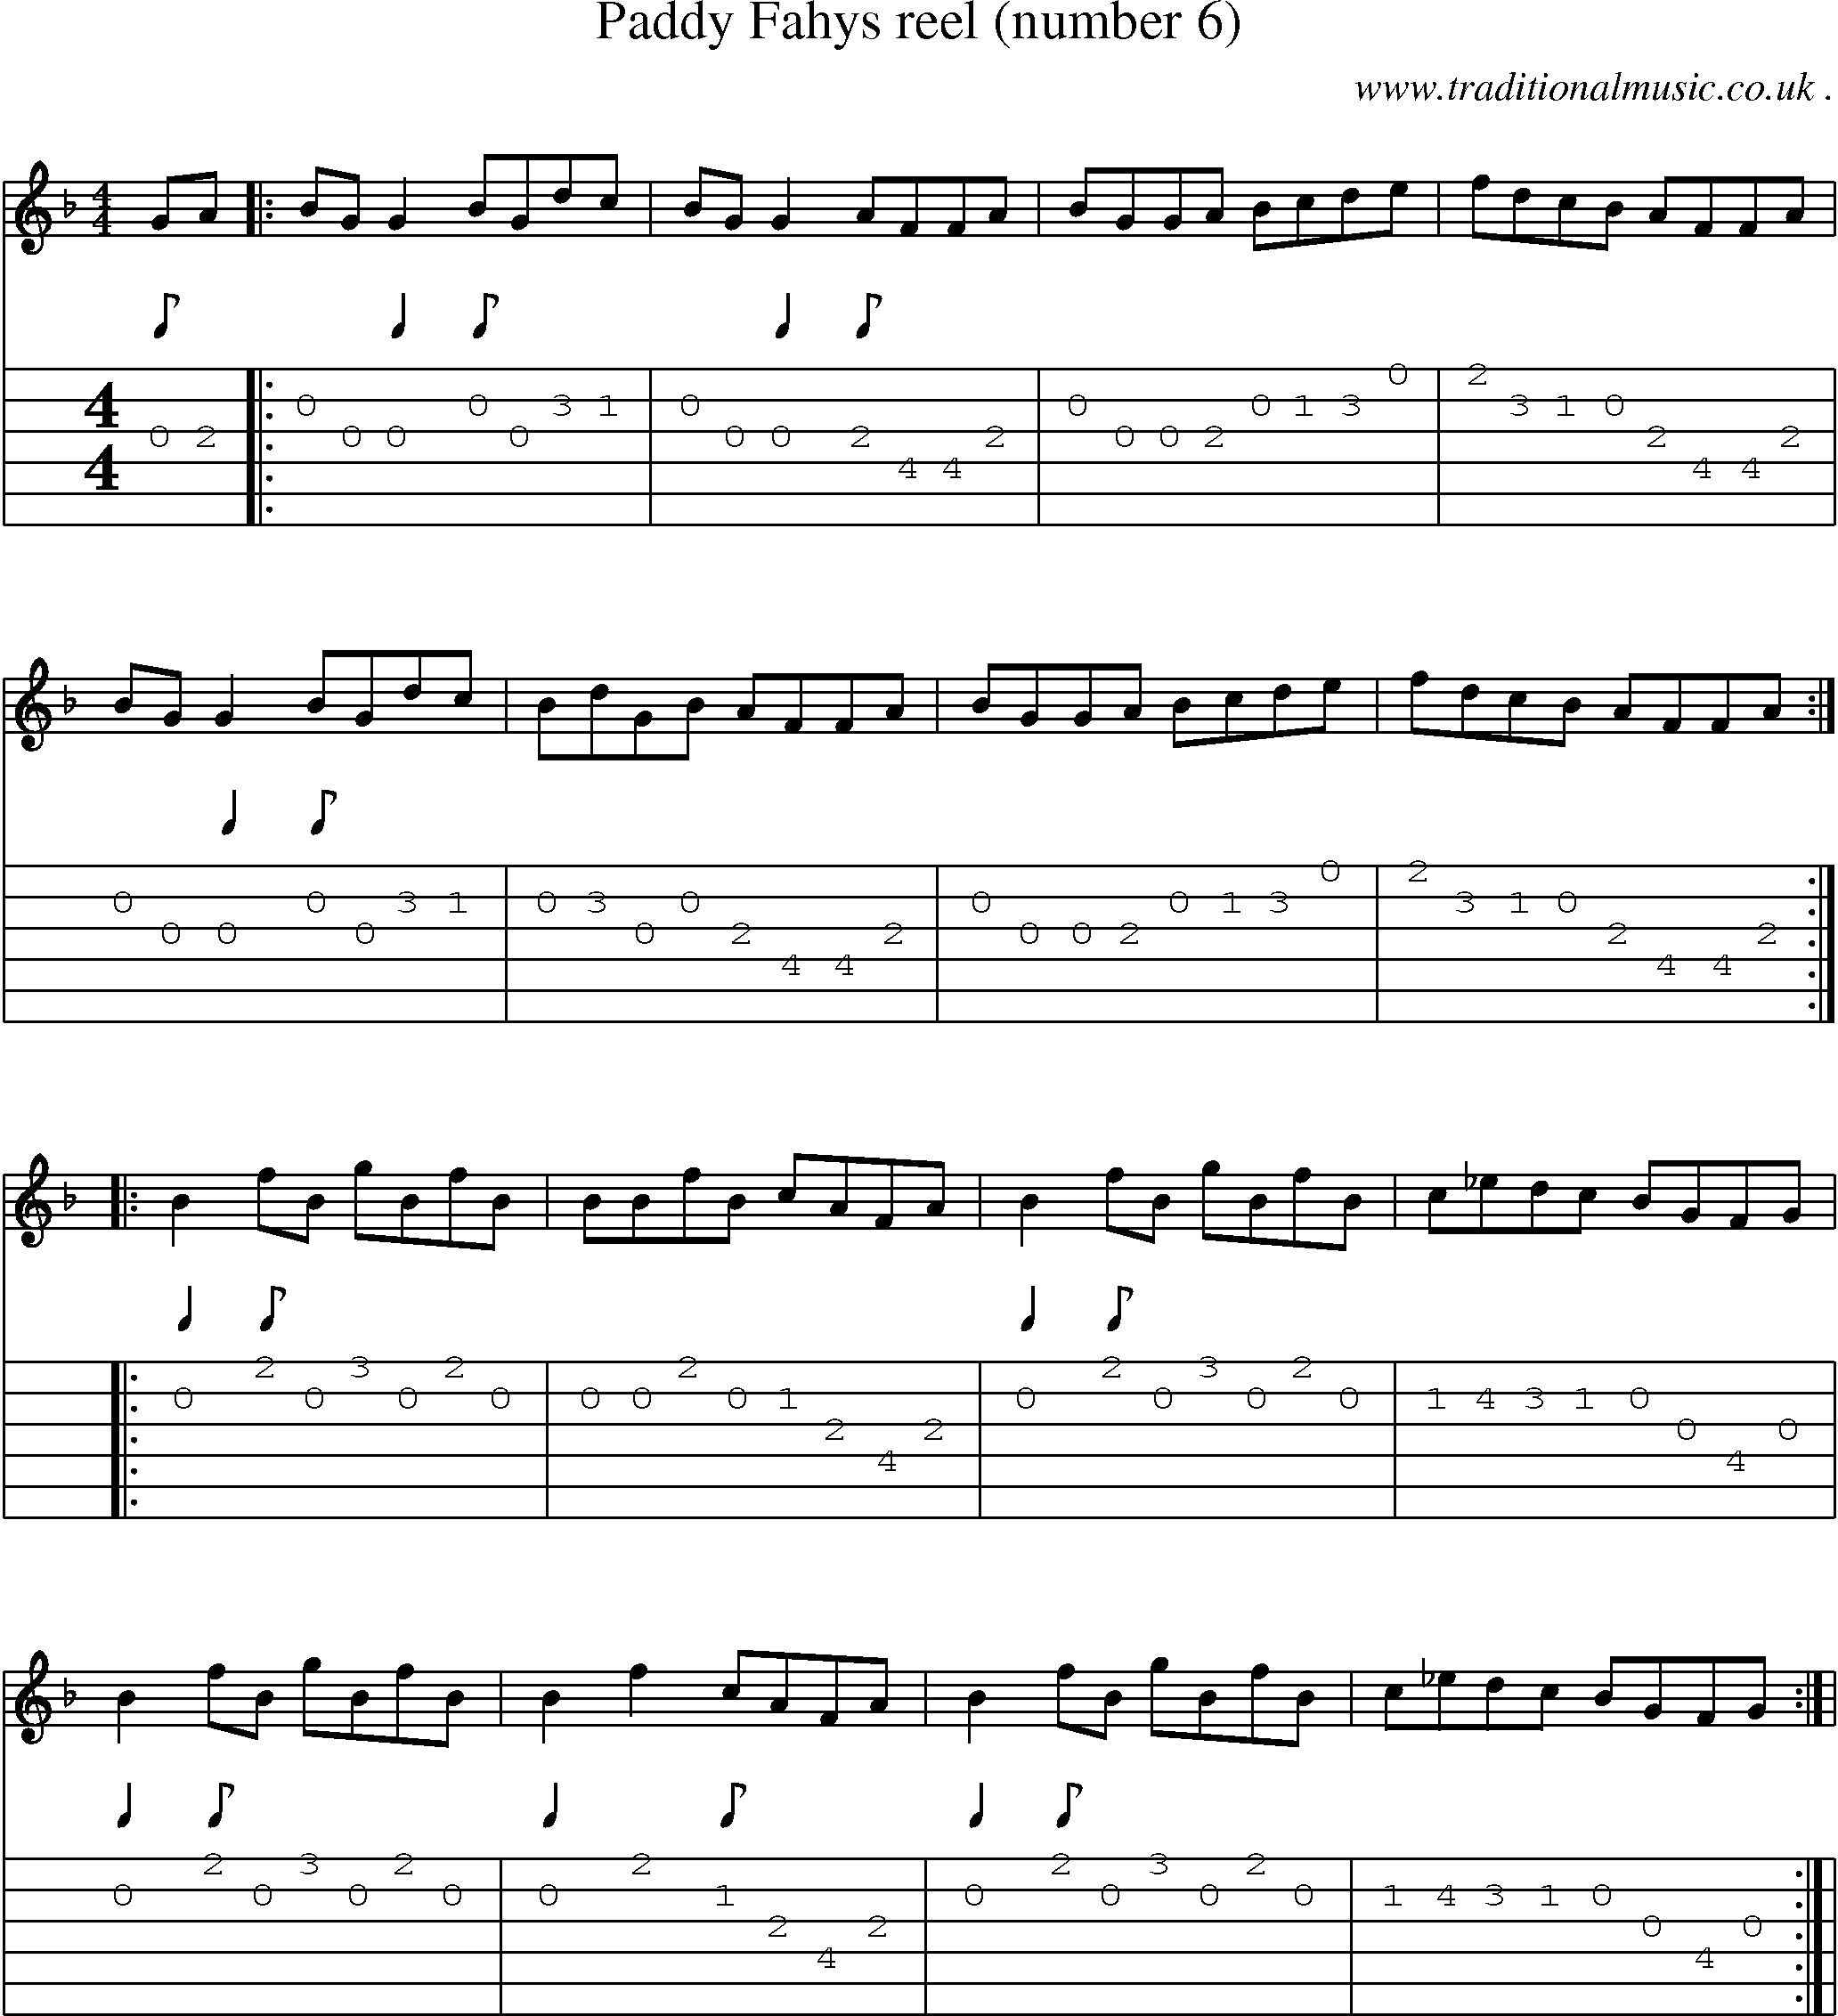 Sheet-Music and Guitar Tabs for Paddy Fahys Reel (number 6)